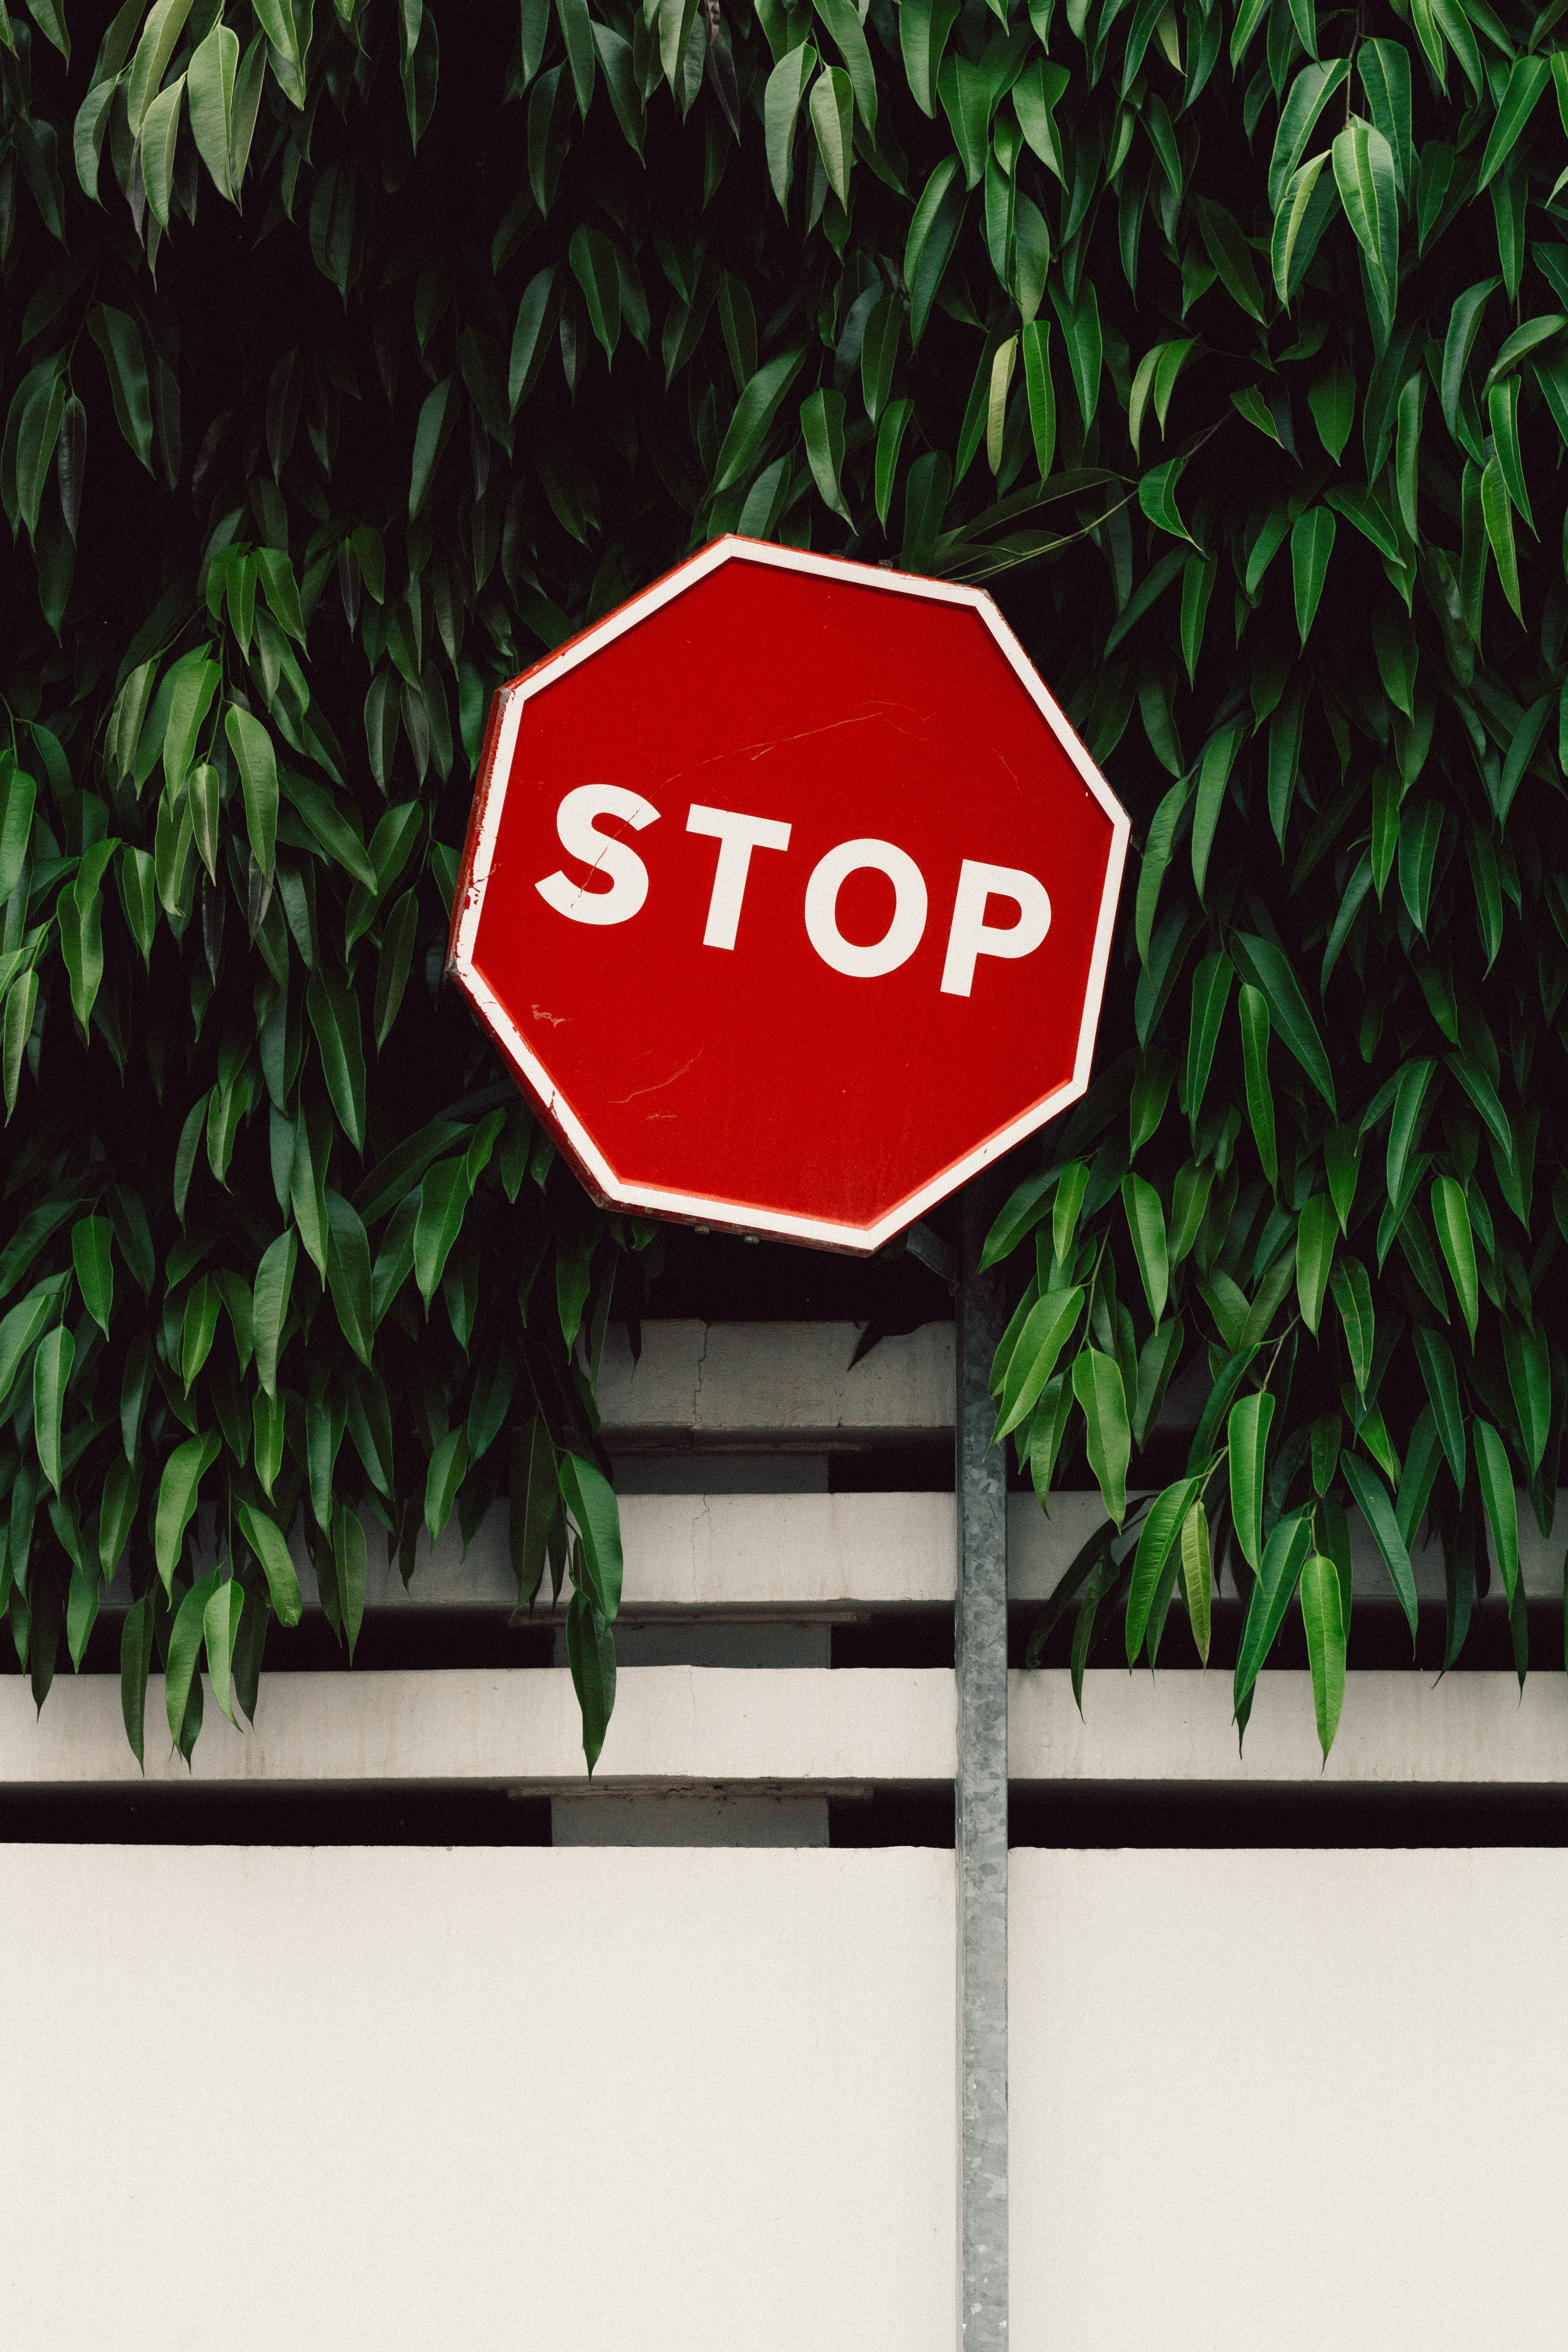 Cool Backgrounds foliage, words, stop, fence Sign